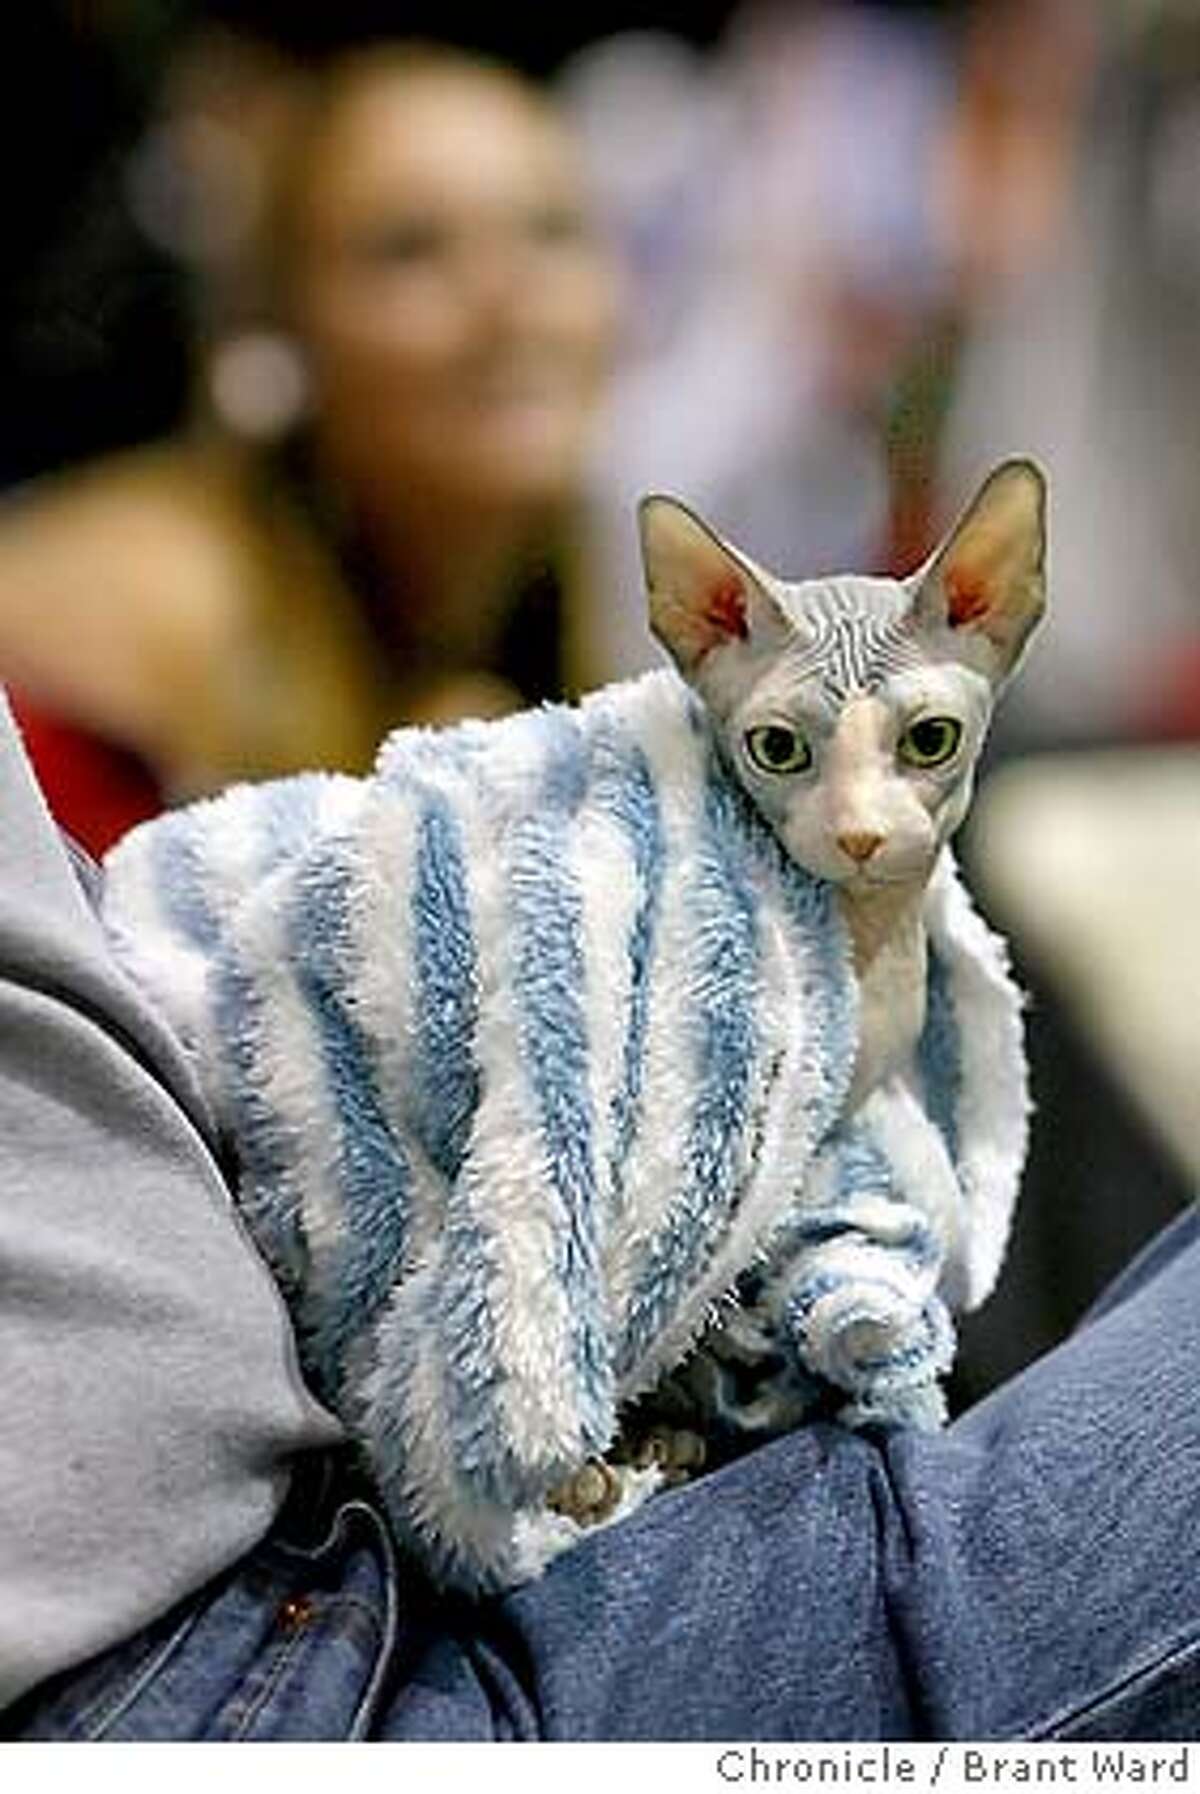 catparty190.JPG A five month old winner at the cat show, "Turbo" gets warm in his owners lap. Turbo is a Sphynx from Bend, Oregon. The 19th annual Cat Fanciers" Association cat show was held at the San Mateo County Expo over the weekend. More than 750 cats representing 41 breeds attracted cat fanciers from all over the nation. This is the most prestigious competition in the pedigreed cat world. {Brant Ward/San Francisco Chronicle}11/19/06